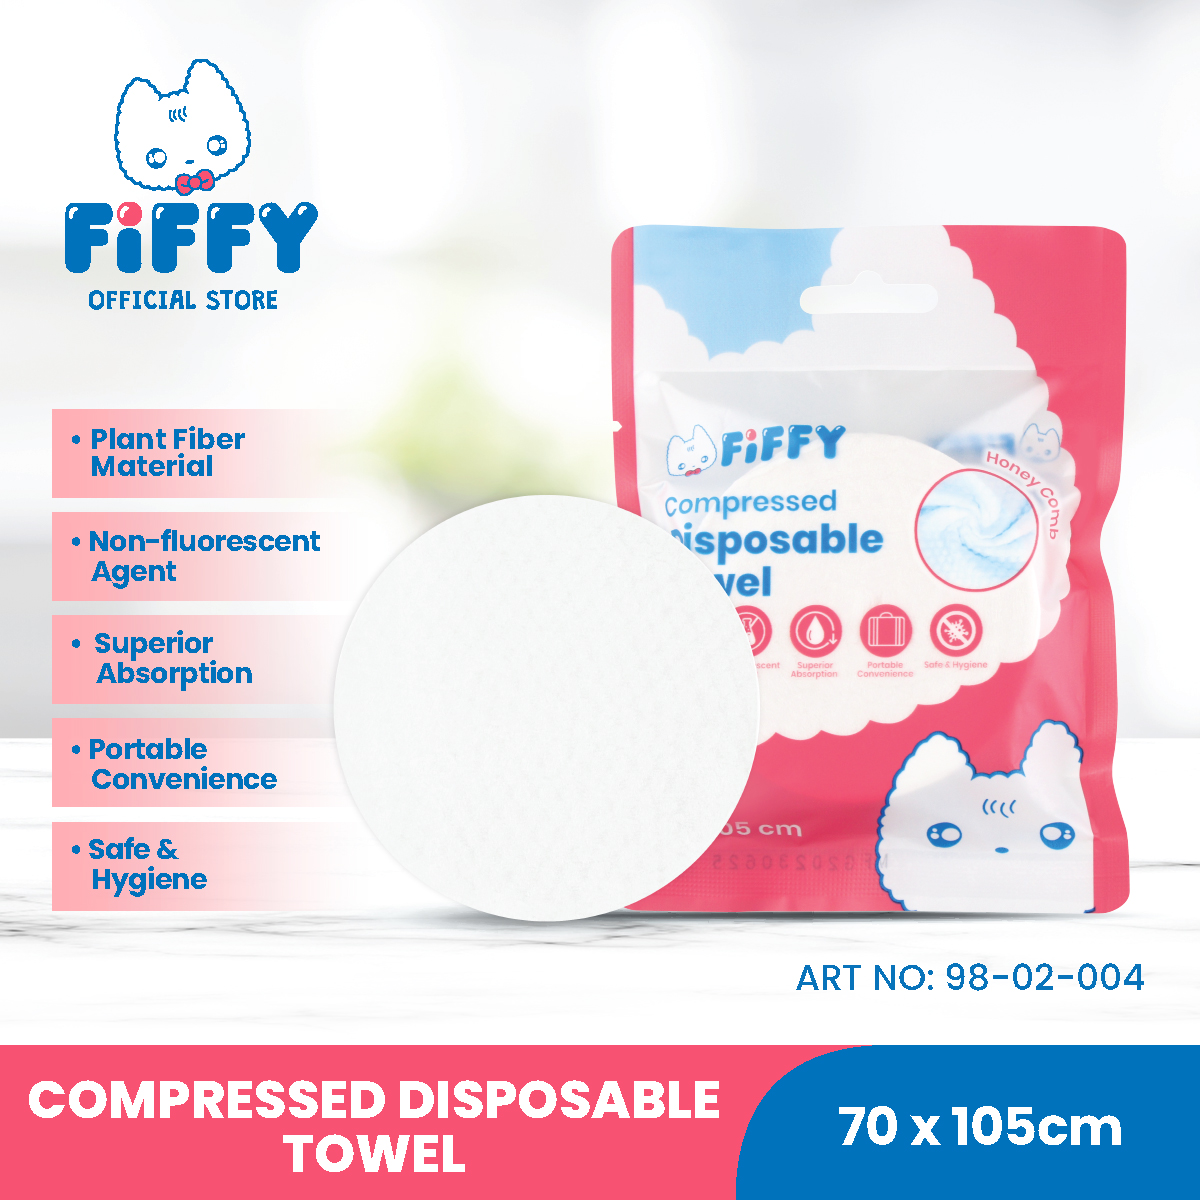 FIFFY COMPRESSED DISPOSABLE TOWEL